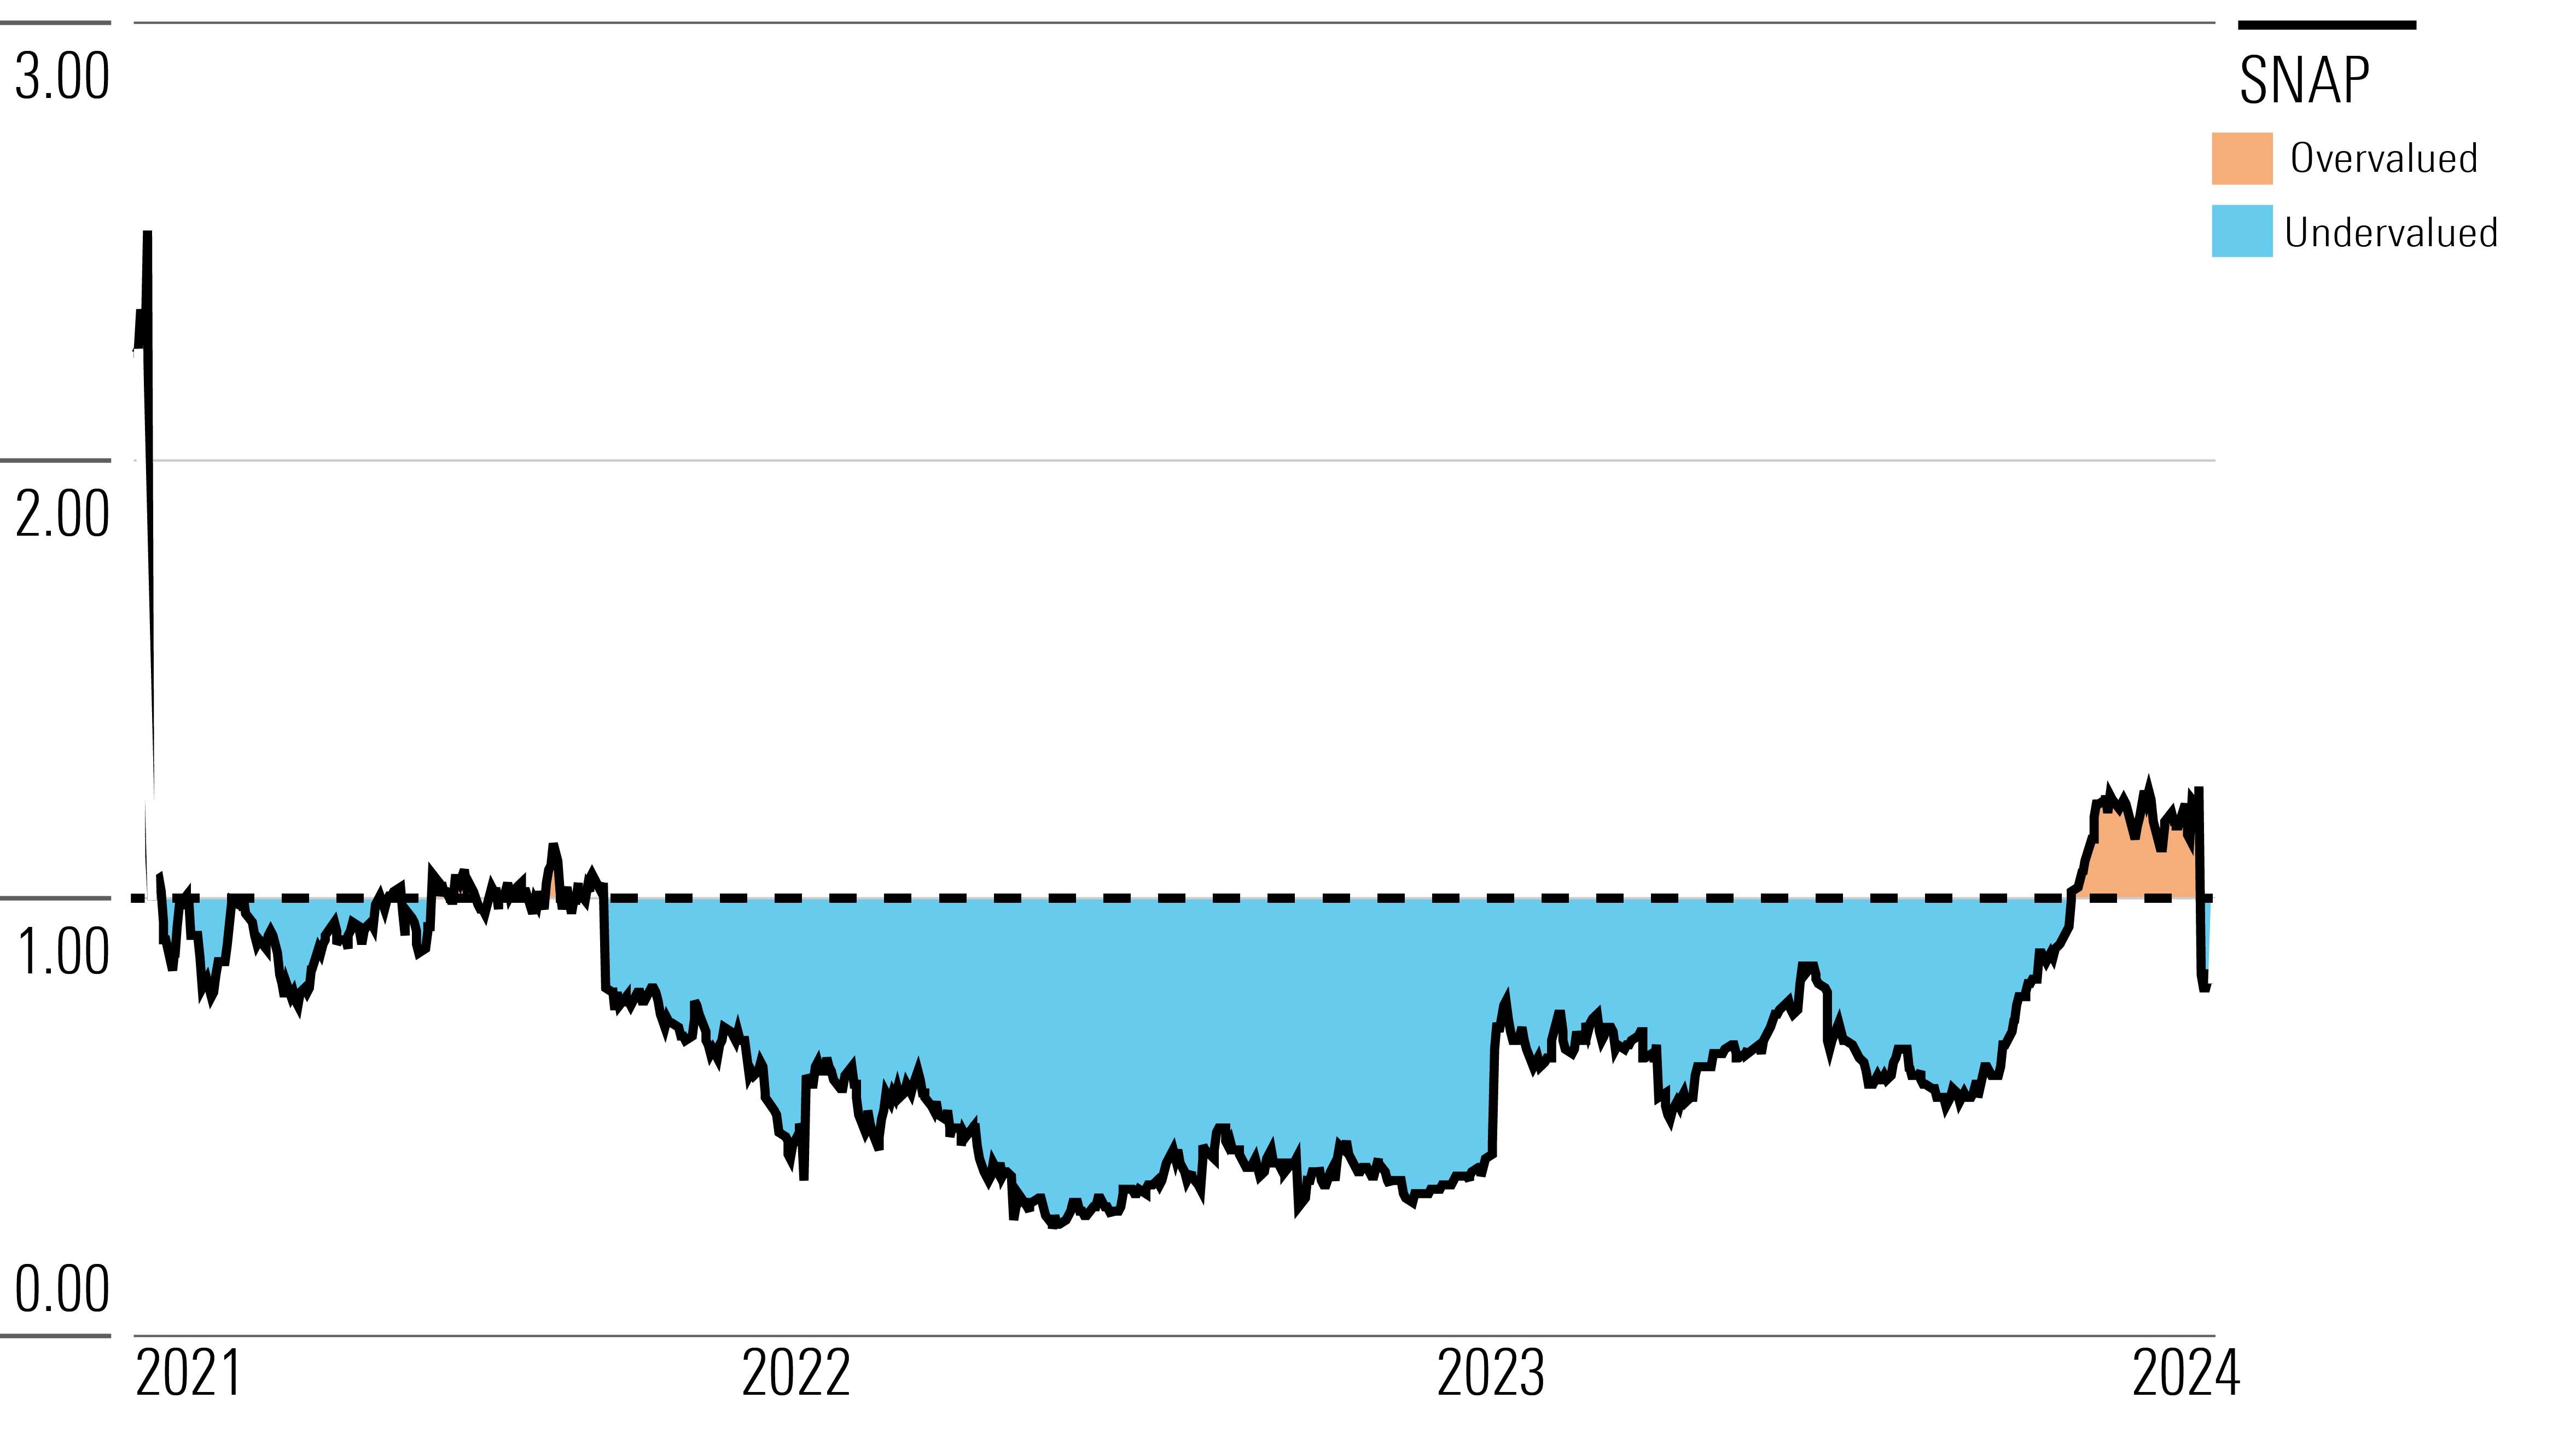 Area chart showing the price to fair-value ratio for Snap over the past three years through Feb. 13, 2021.